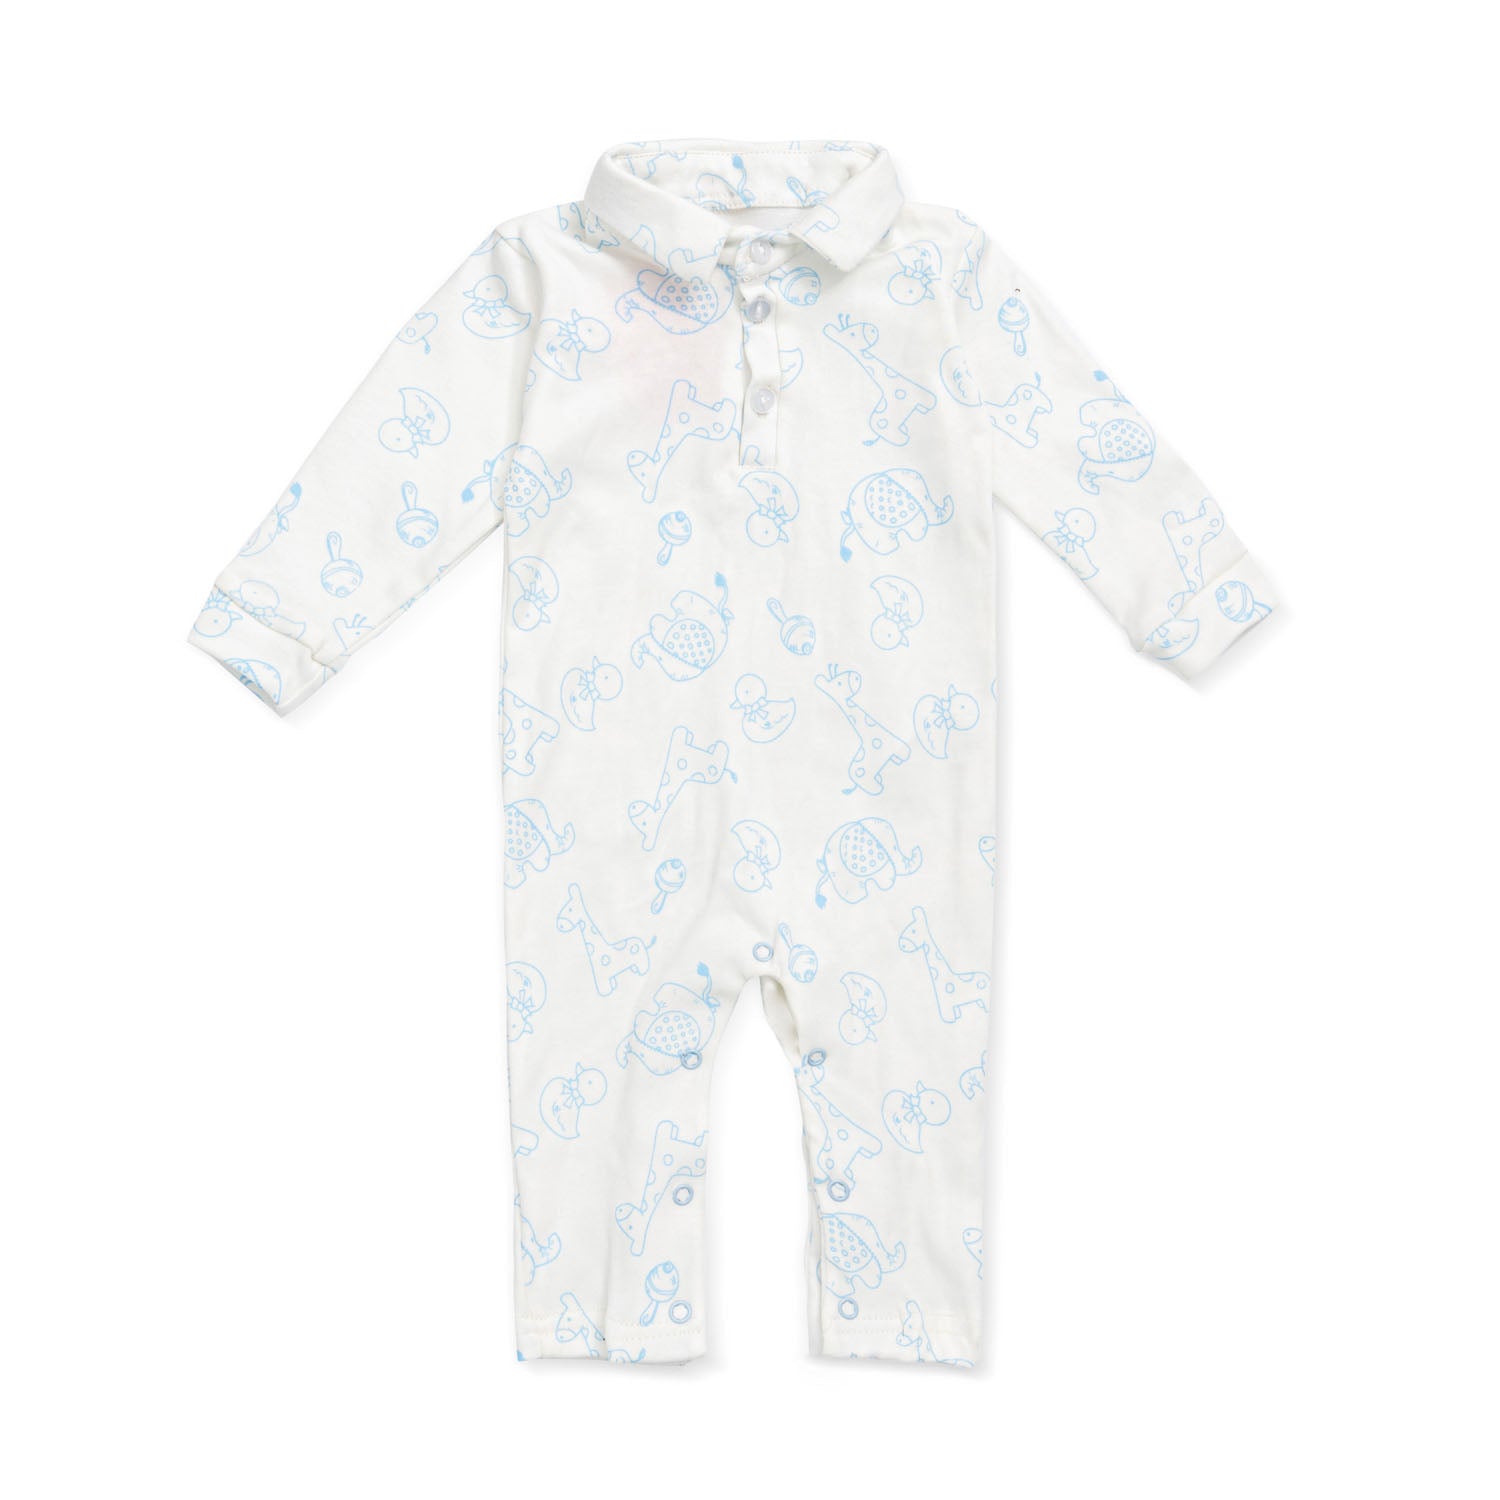 white polo salopette with light blue animal embroidery pattern